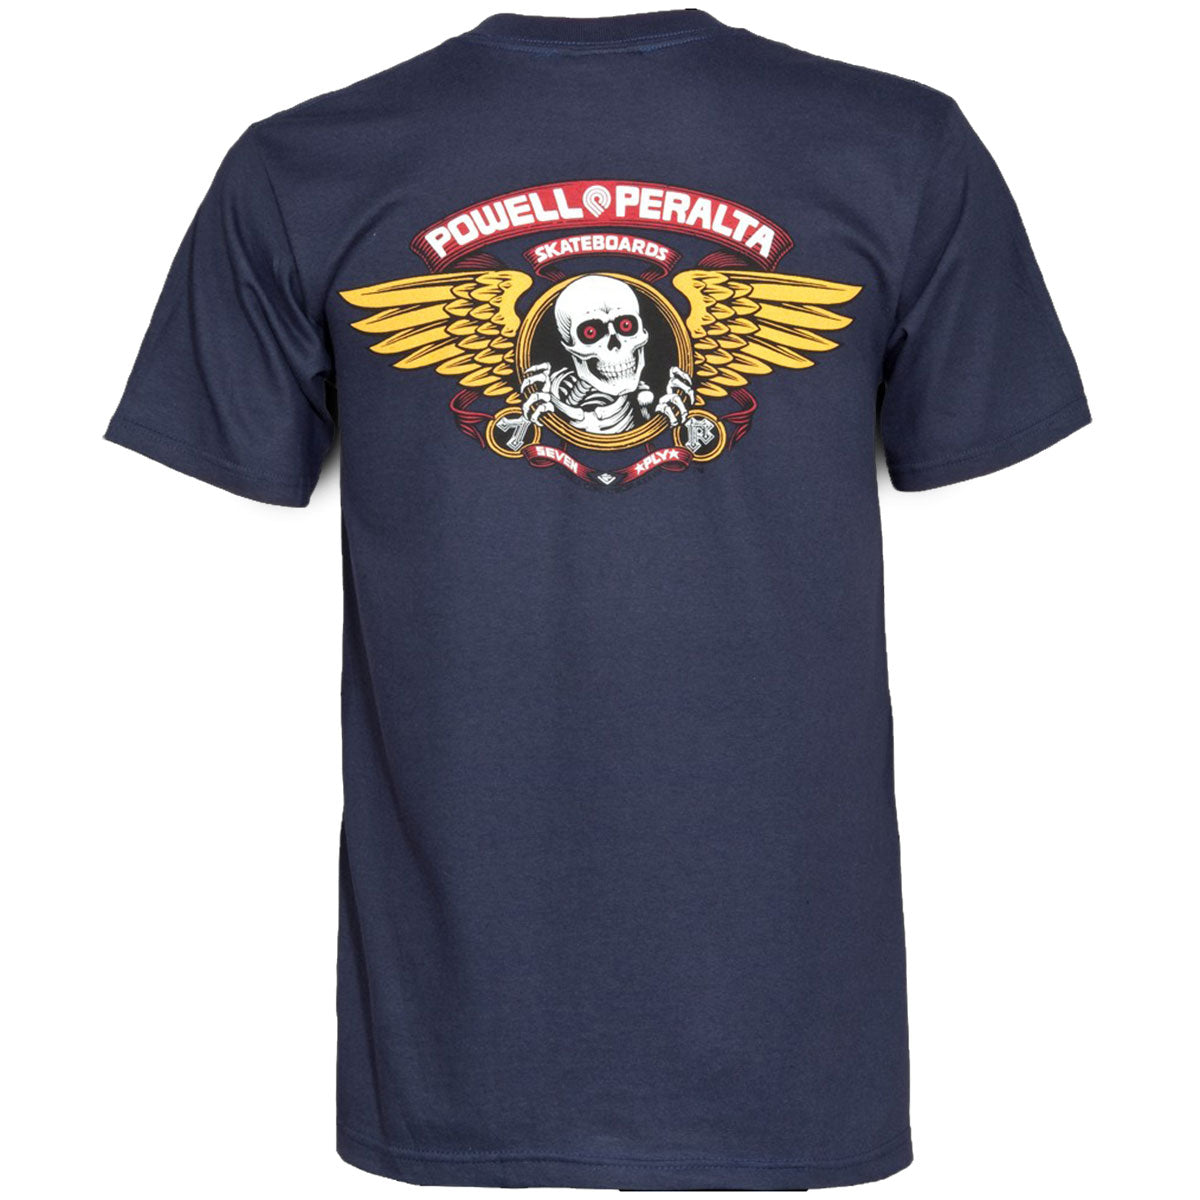 Powell-Peralta Winged Ripper T-Shirt - Navy image 1